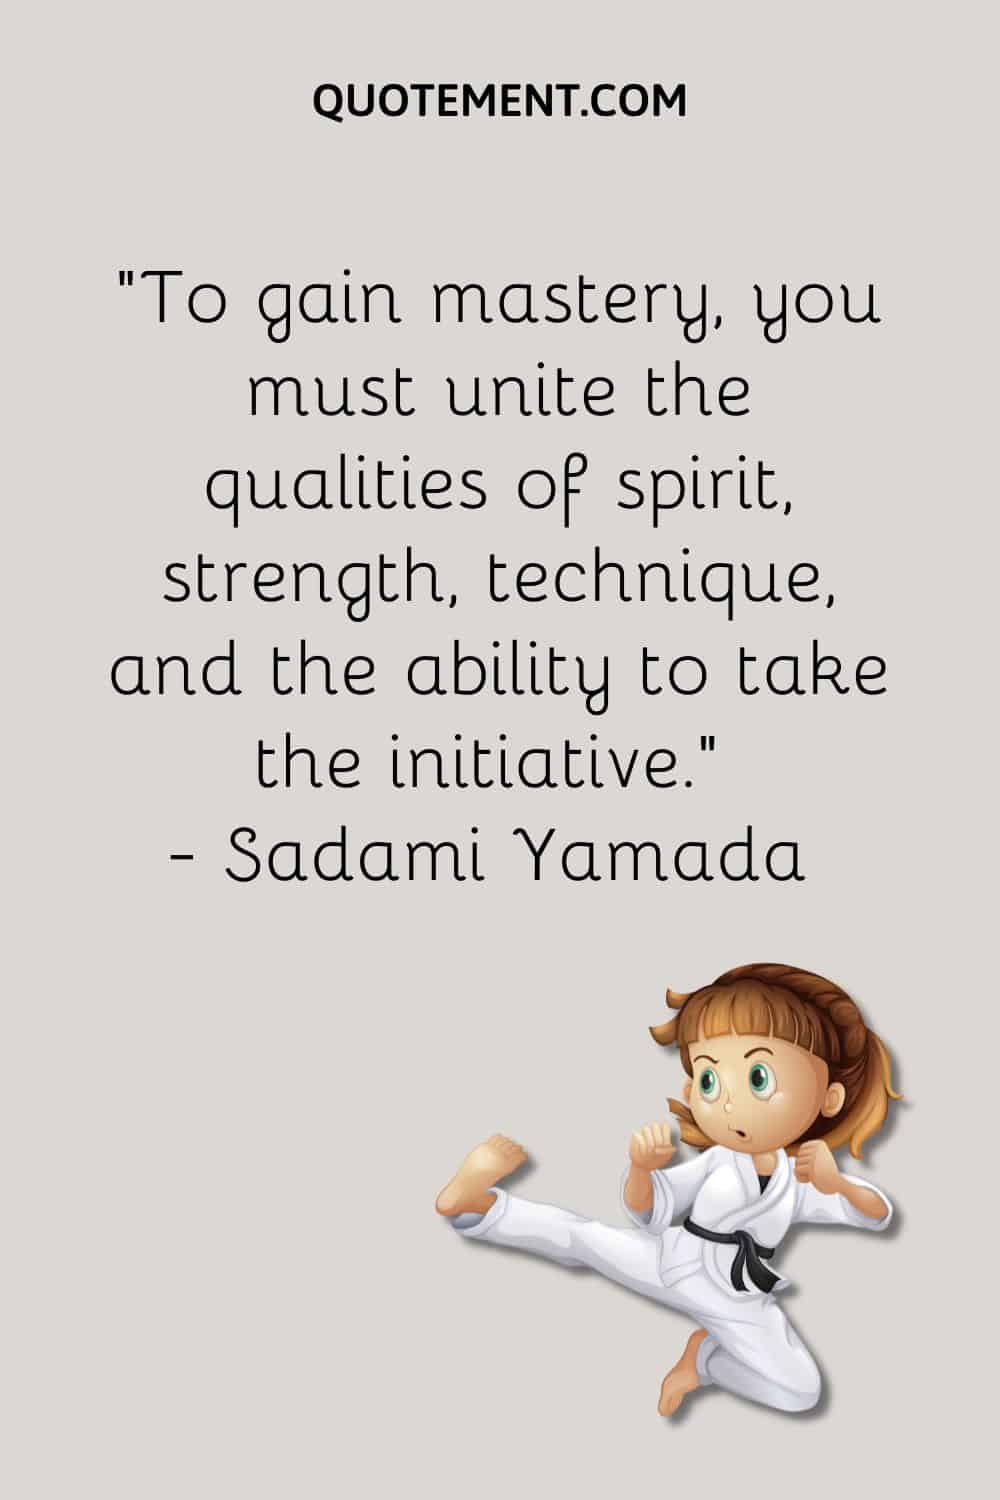 To gain mastery, you must unite the qualities of spirit, strength, technique, and the ability to take the initiative